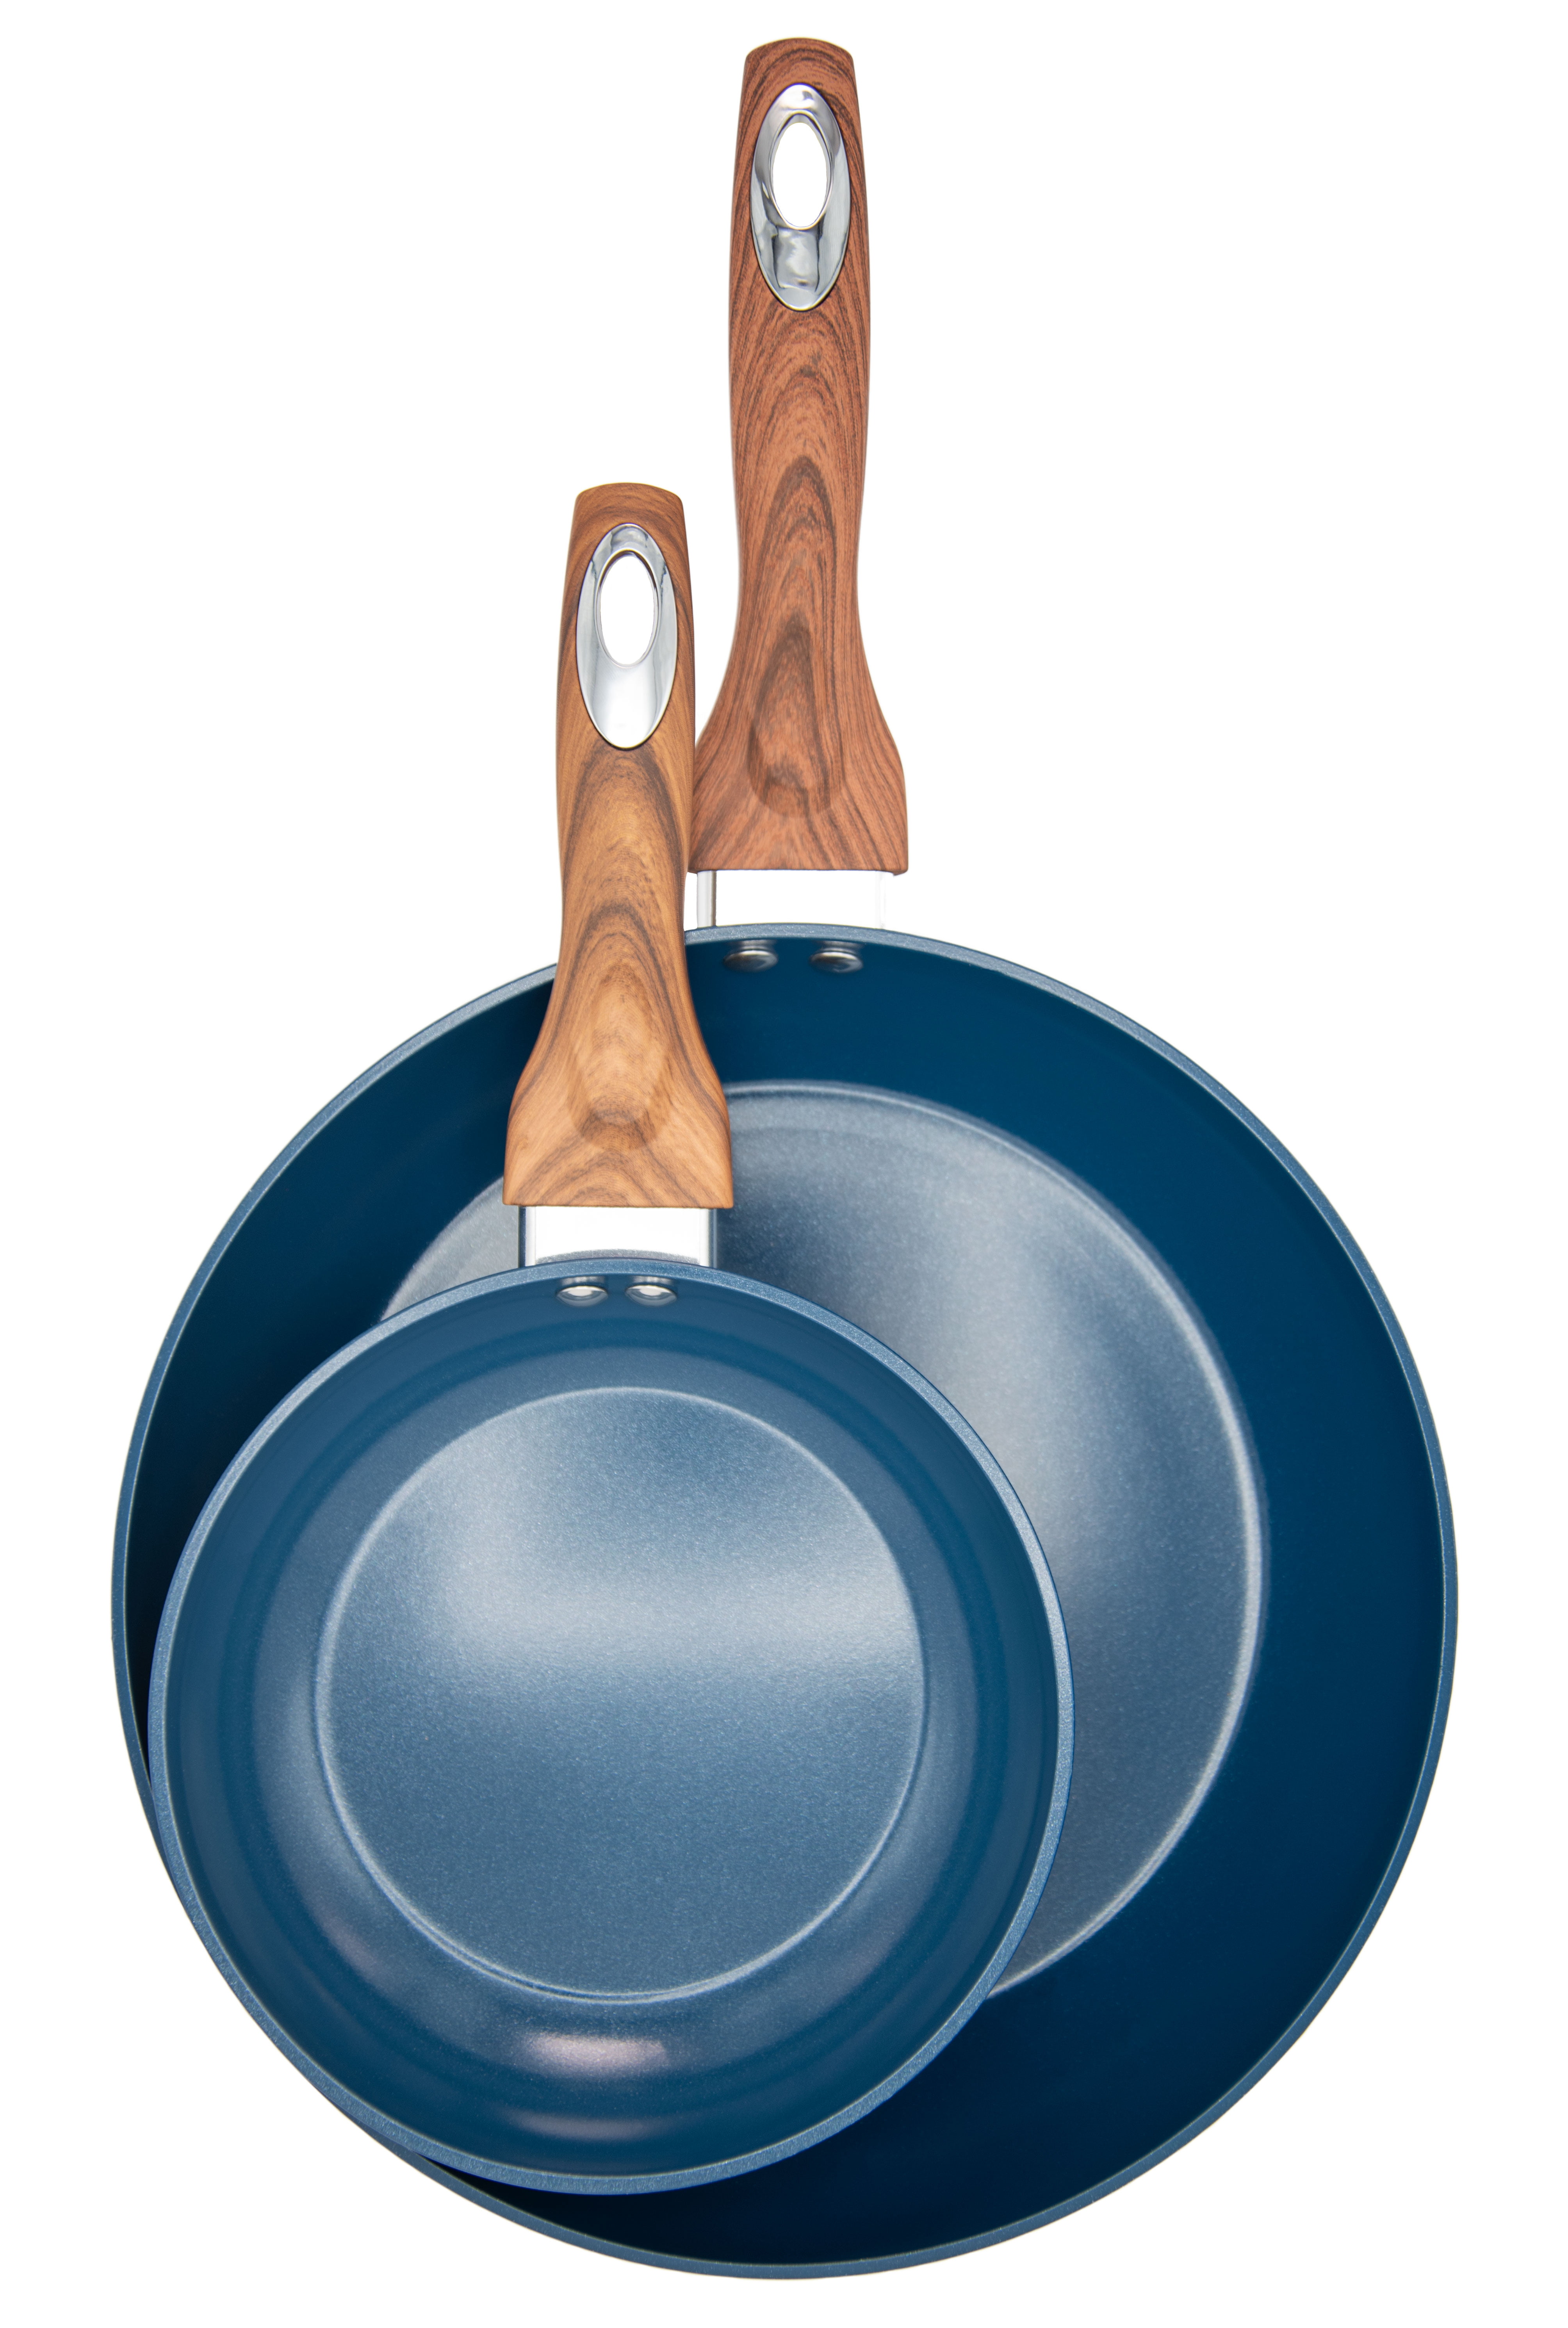 Phantom Chef 8” & 11” Frypan with Wood Handle and Aluminum body – Navy 